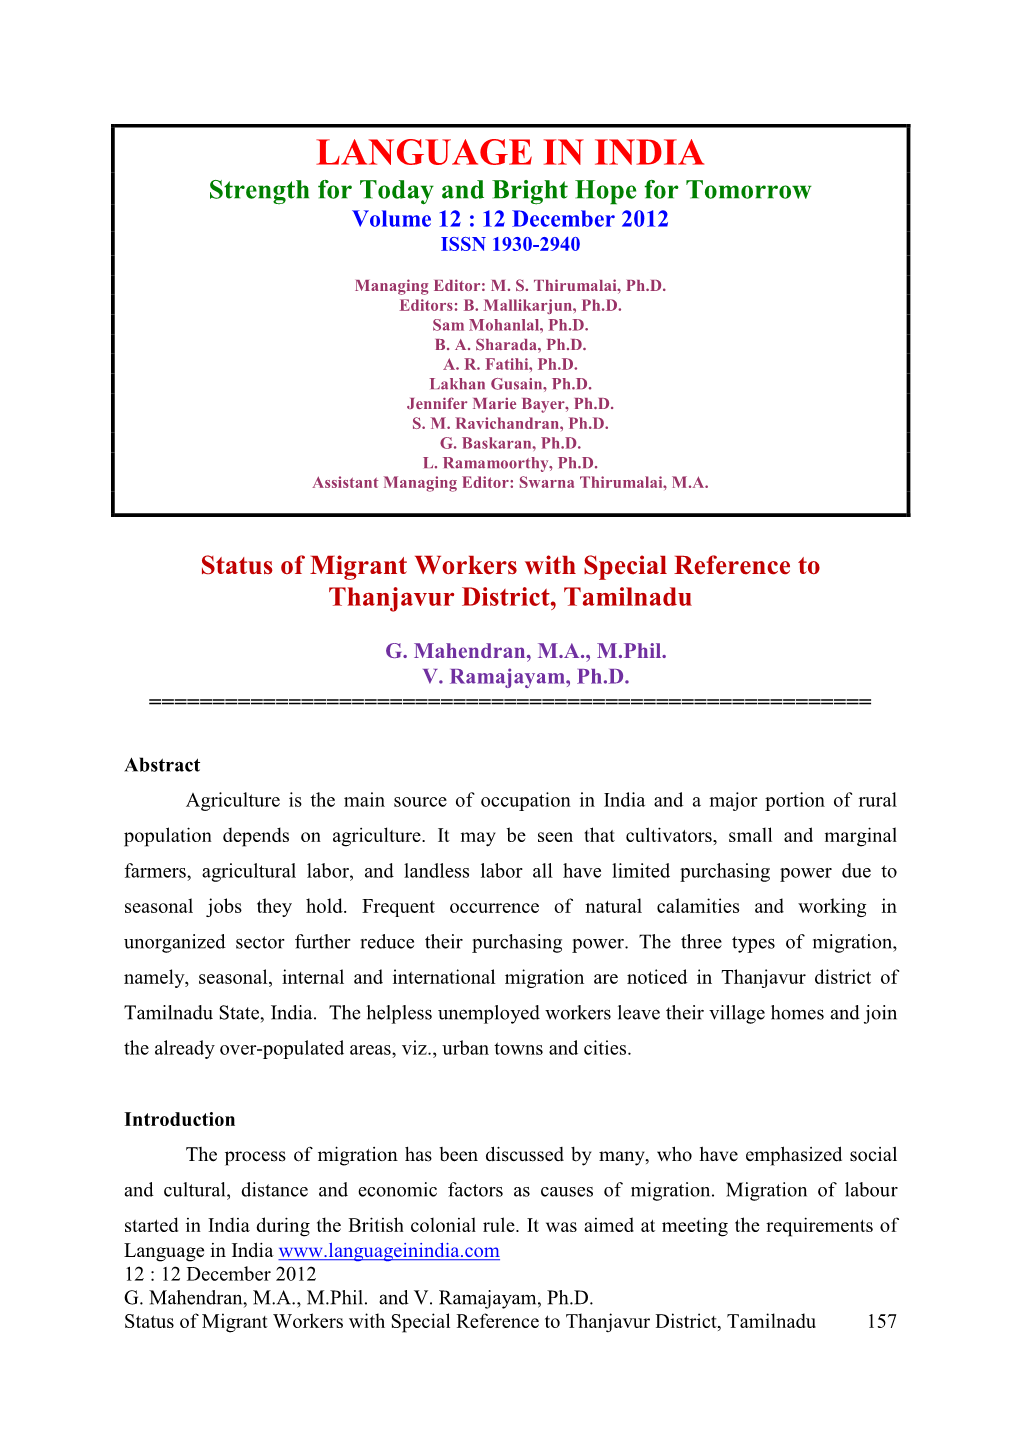 A Status of Migrant Workers with Special References To